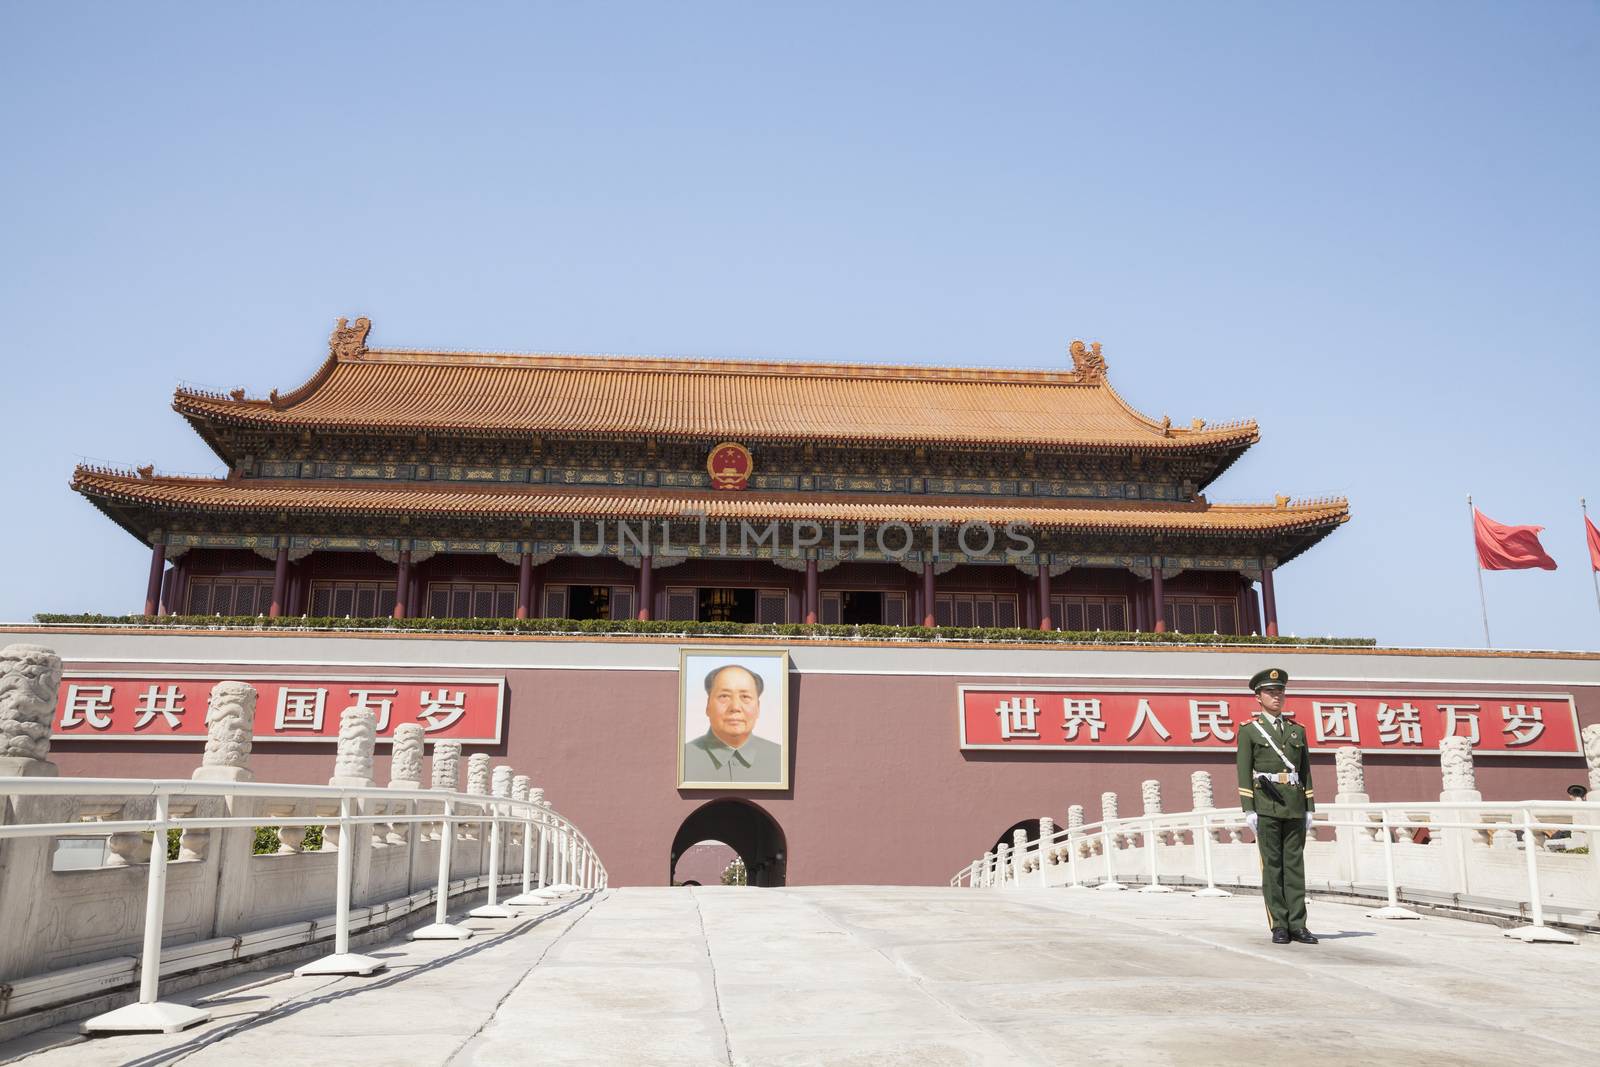 Tiananmen Square, Gate of Heavenly Peace with Mao's Portrait and guard, Beijing, China.